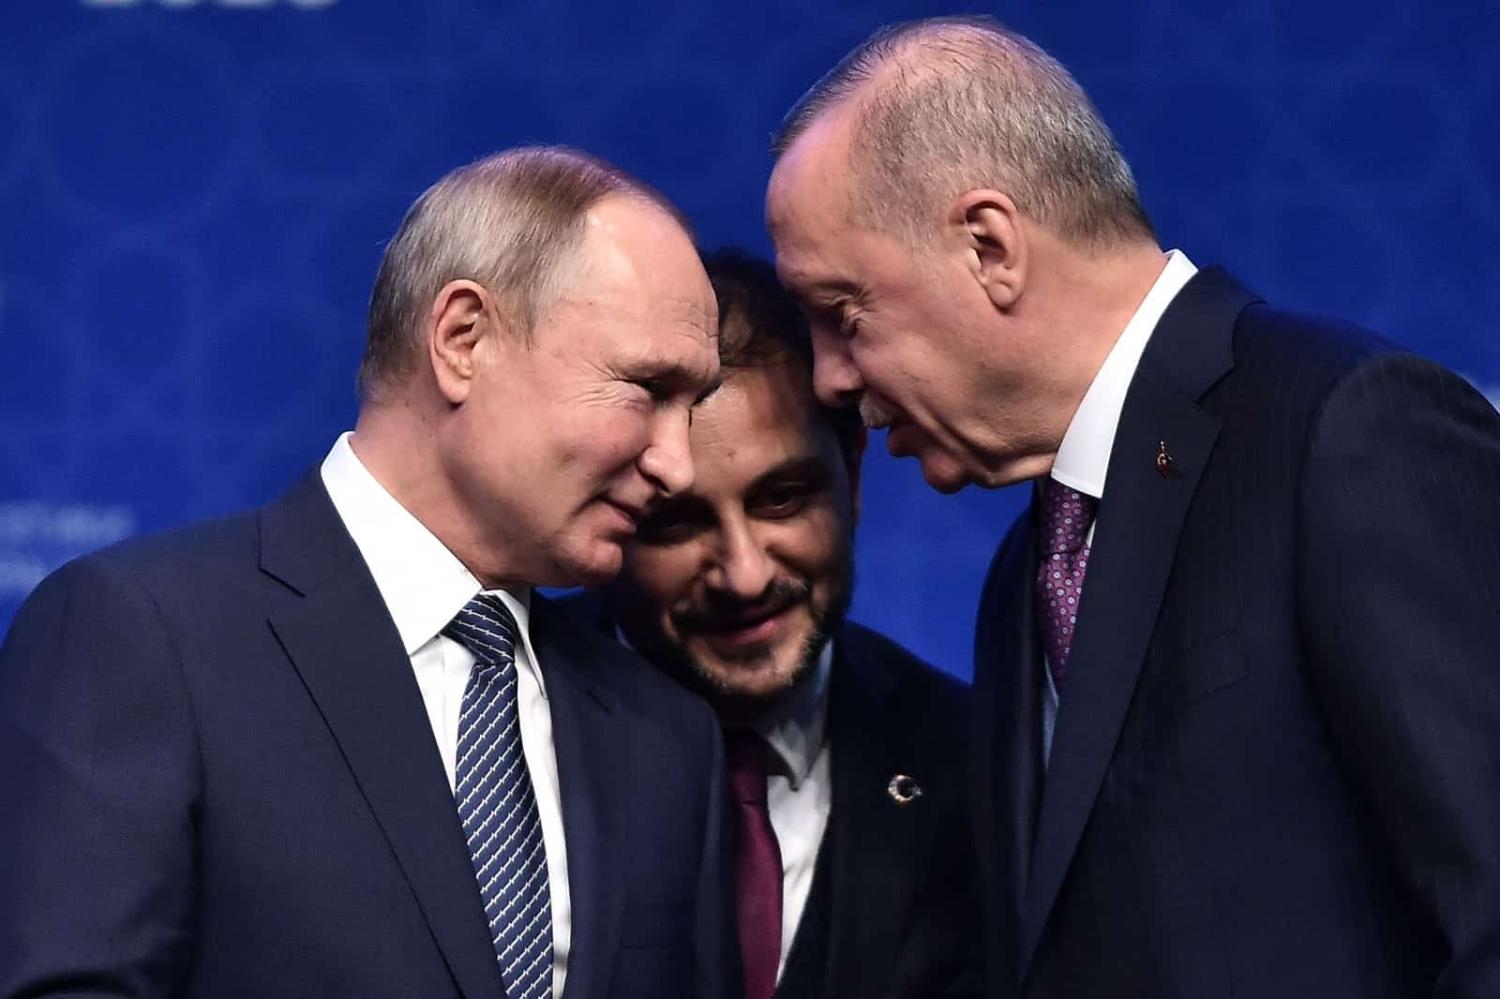 Russian President Vladimir Putin (L) and Turkish President Recep Tayyip Erdoğan (R) at an inauguration ceremony of TurkStream in January 2020 in Istanbul (Ozan Kose/AFP via Getty Images)